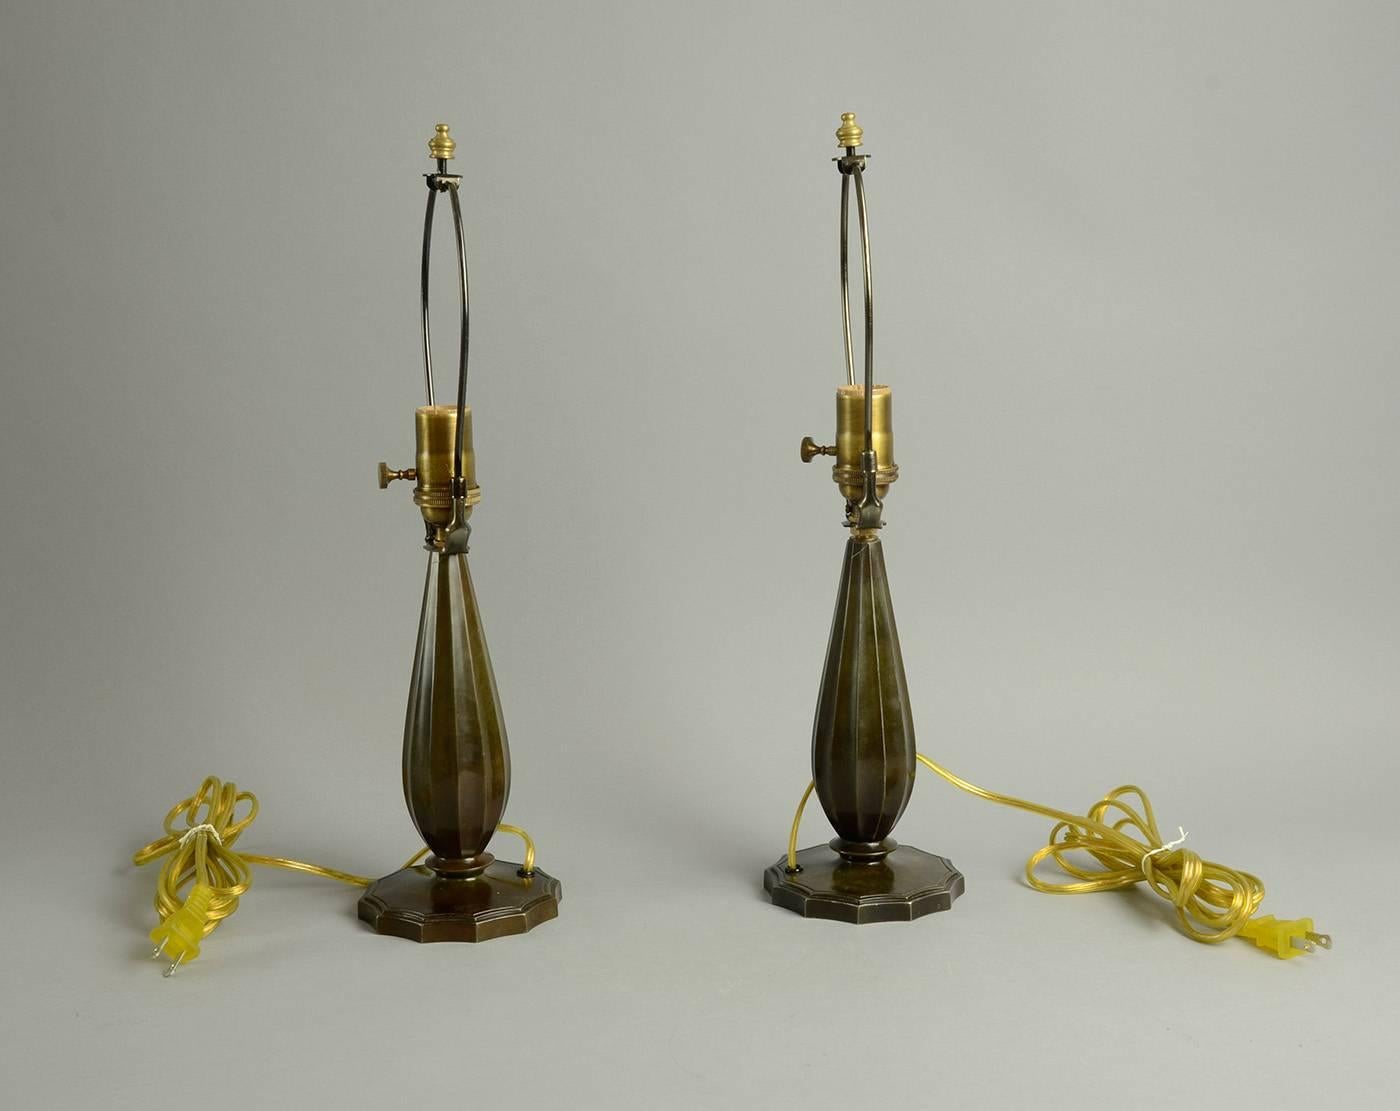 Pair of lamps in disko metal, rewired for US with antique brass fittings, clear plastic wire and plug.